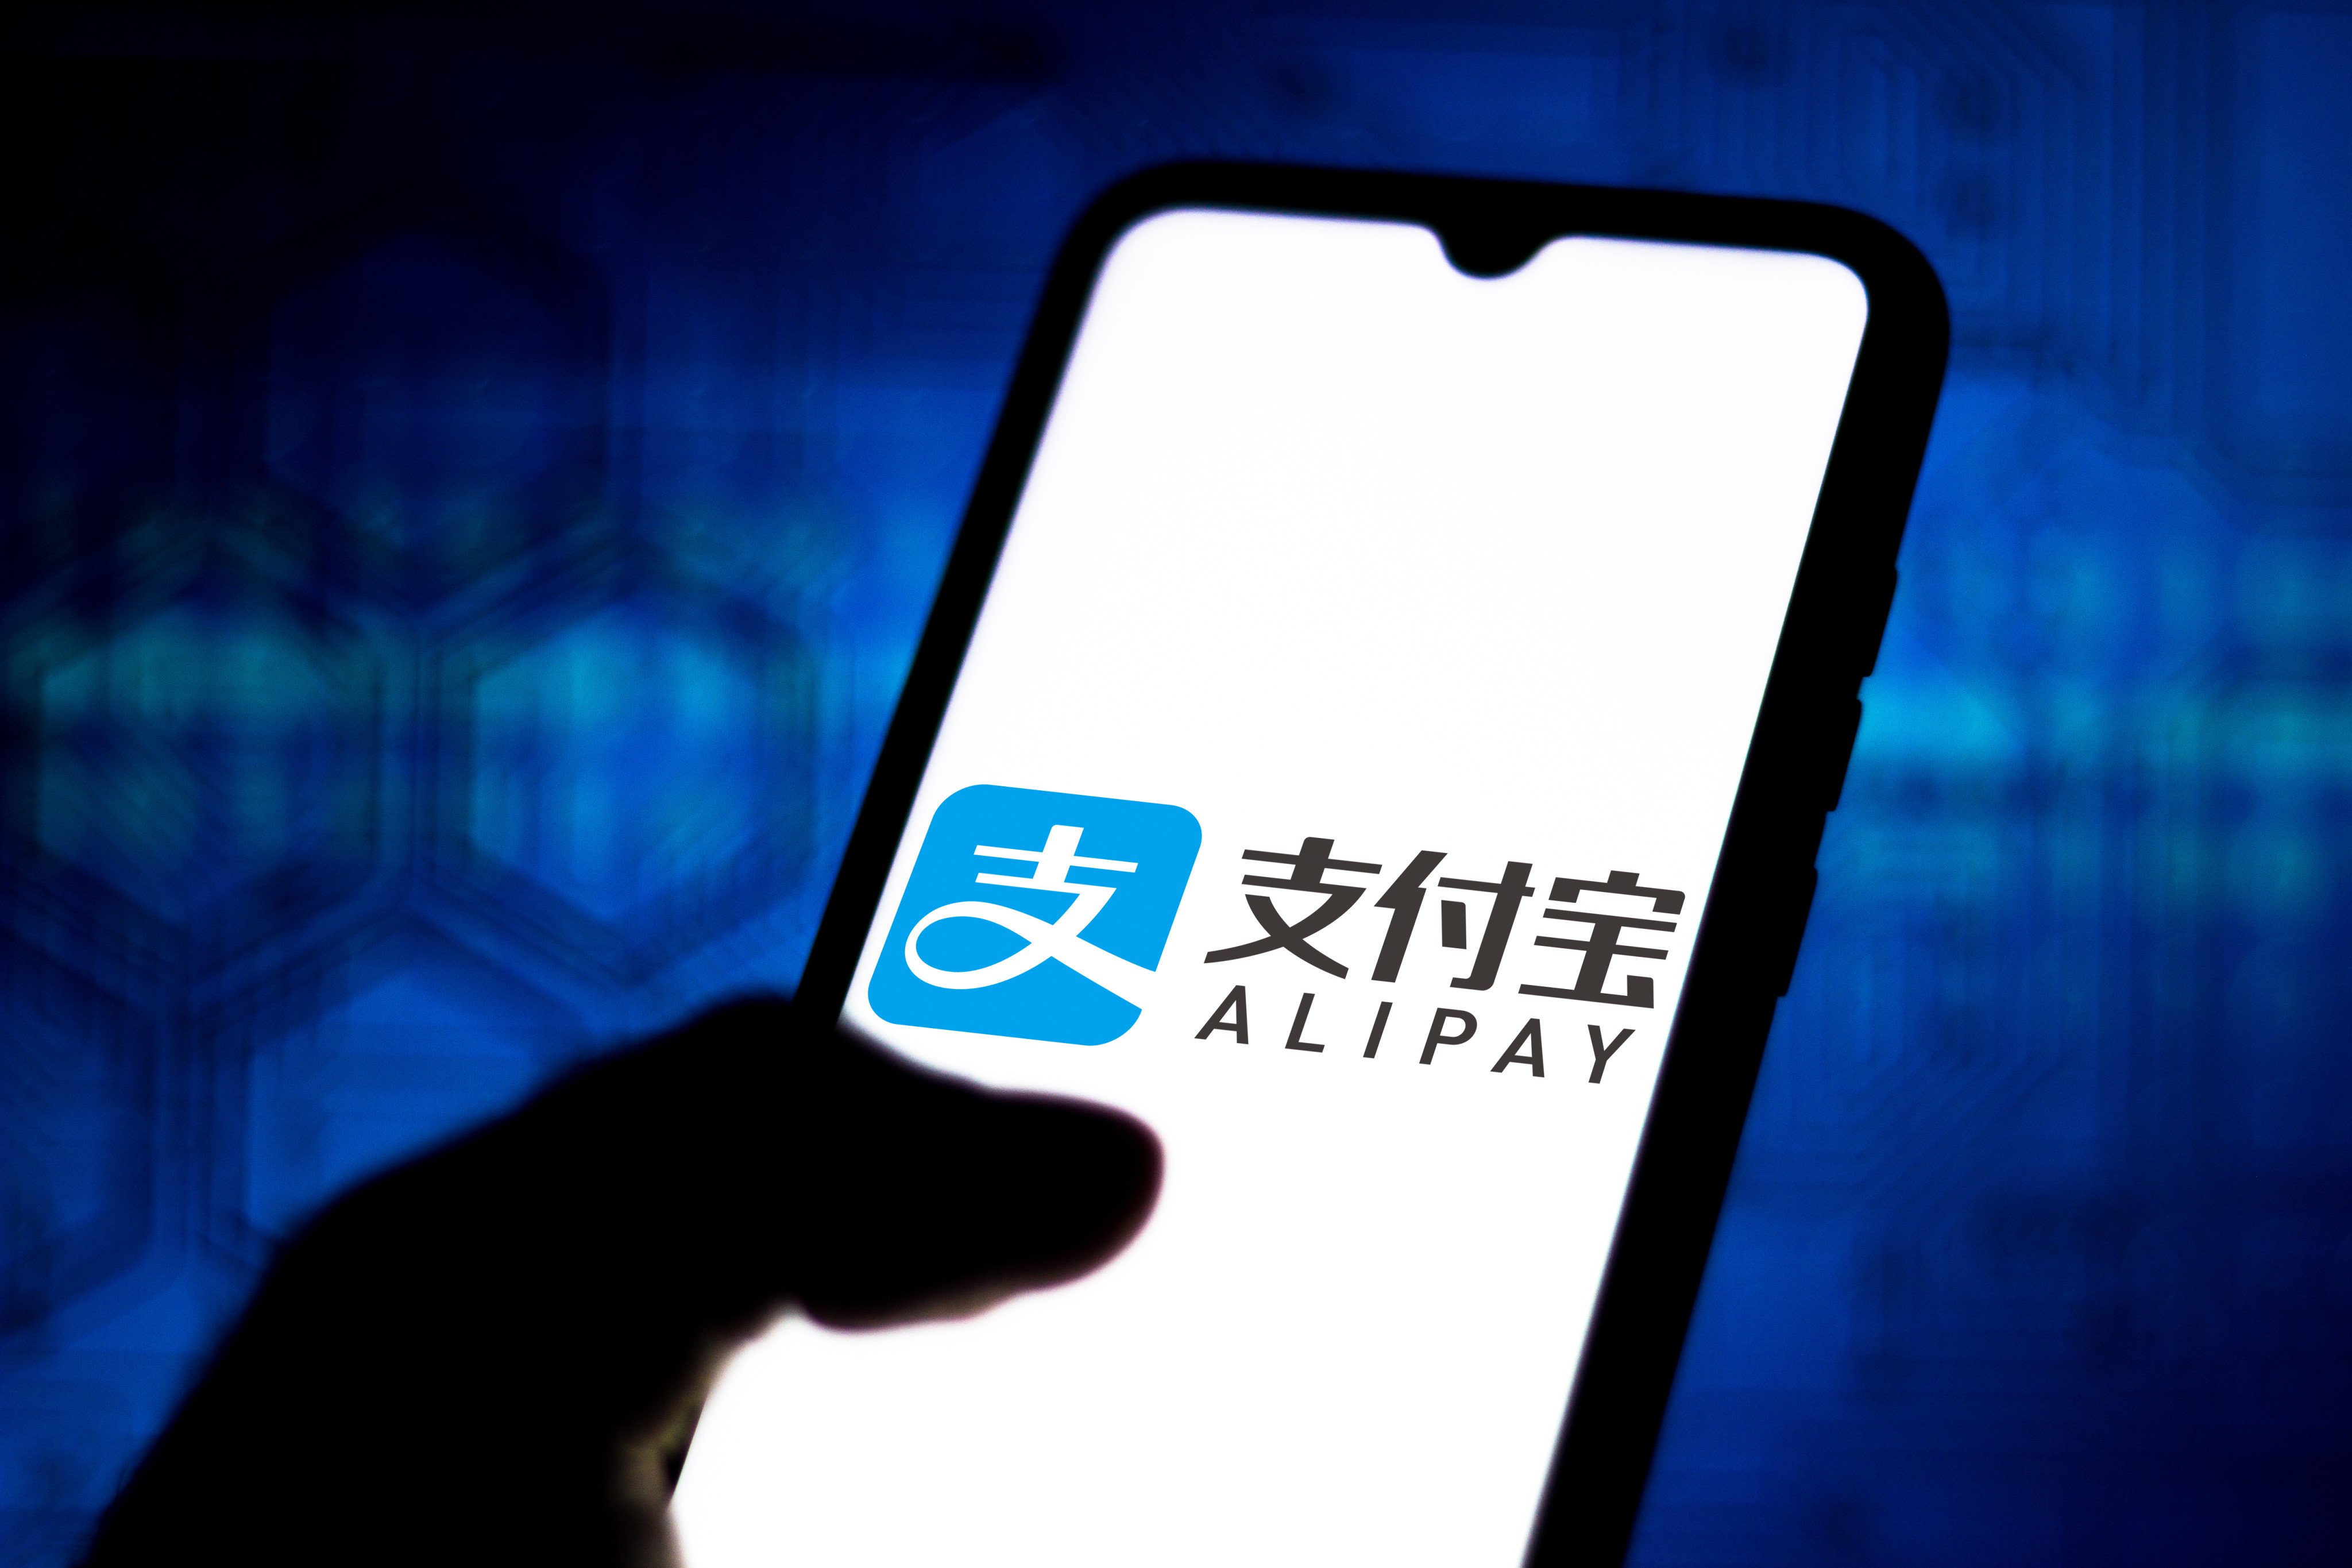 Spending through Alipay from foreigners in China saw a huge surge over the recent Labour Day holiday period. Photo: Shutterstock